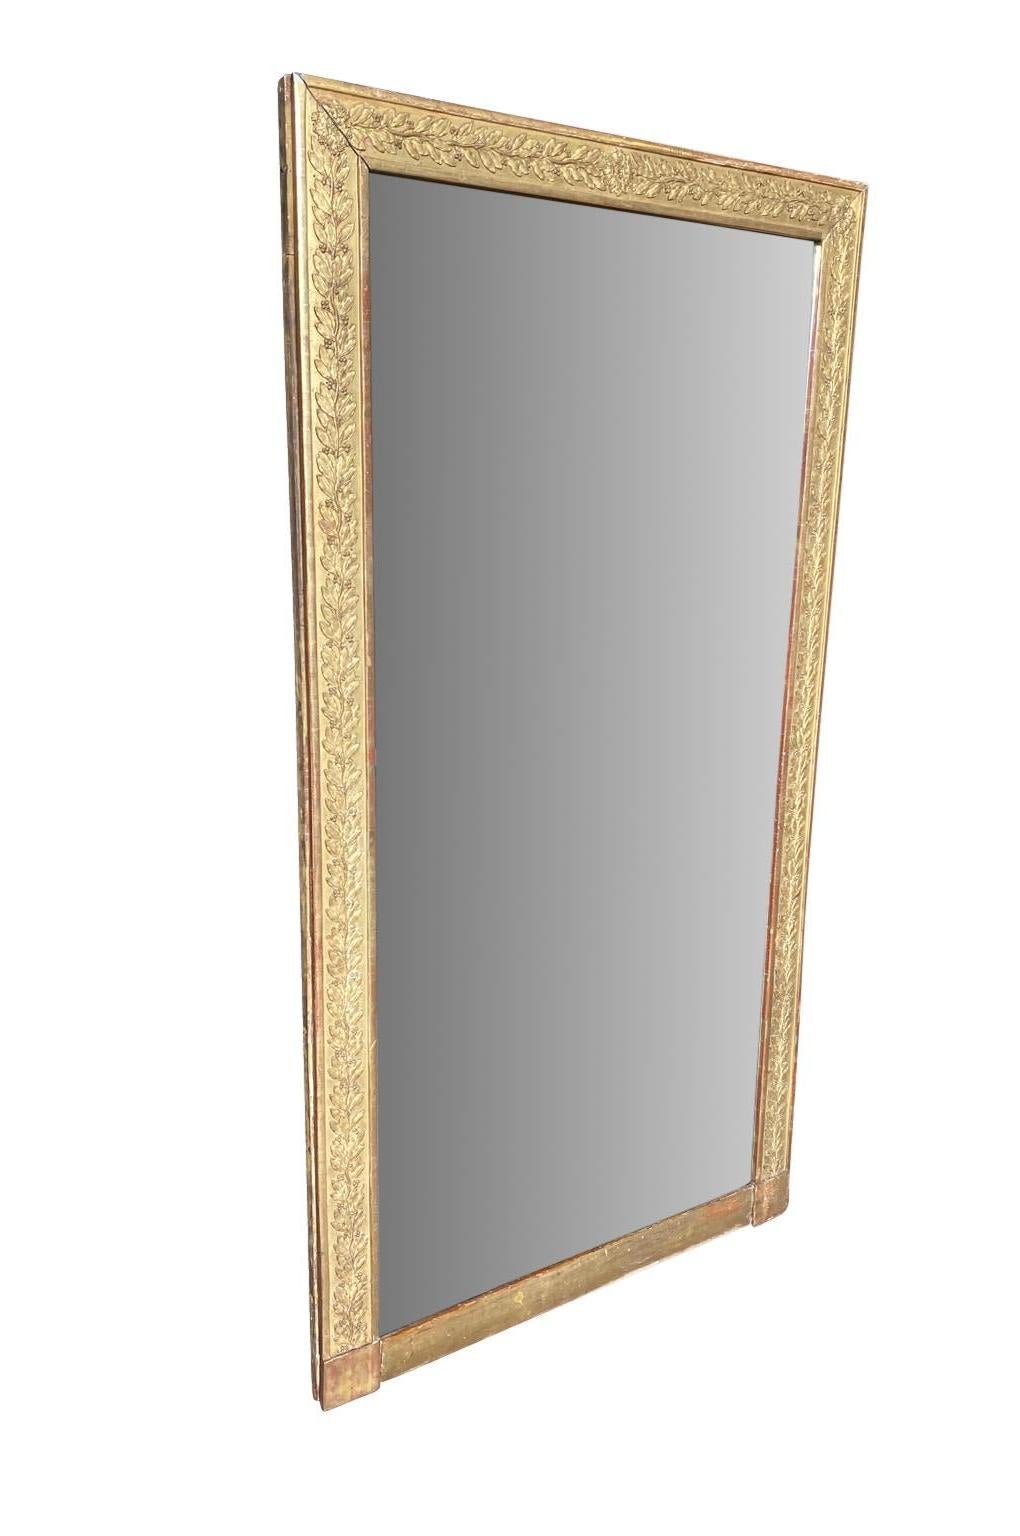 A very lovely French Empire period mirror in gilt wood with a wonderful floral motif. The mirror retains its original mercury glass and is in 2 sections. Please see unphoto shopped photos.